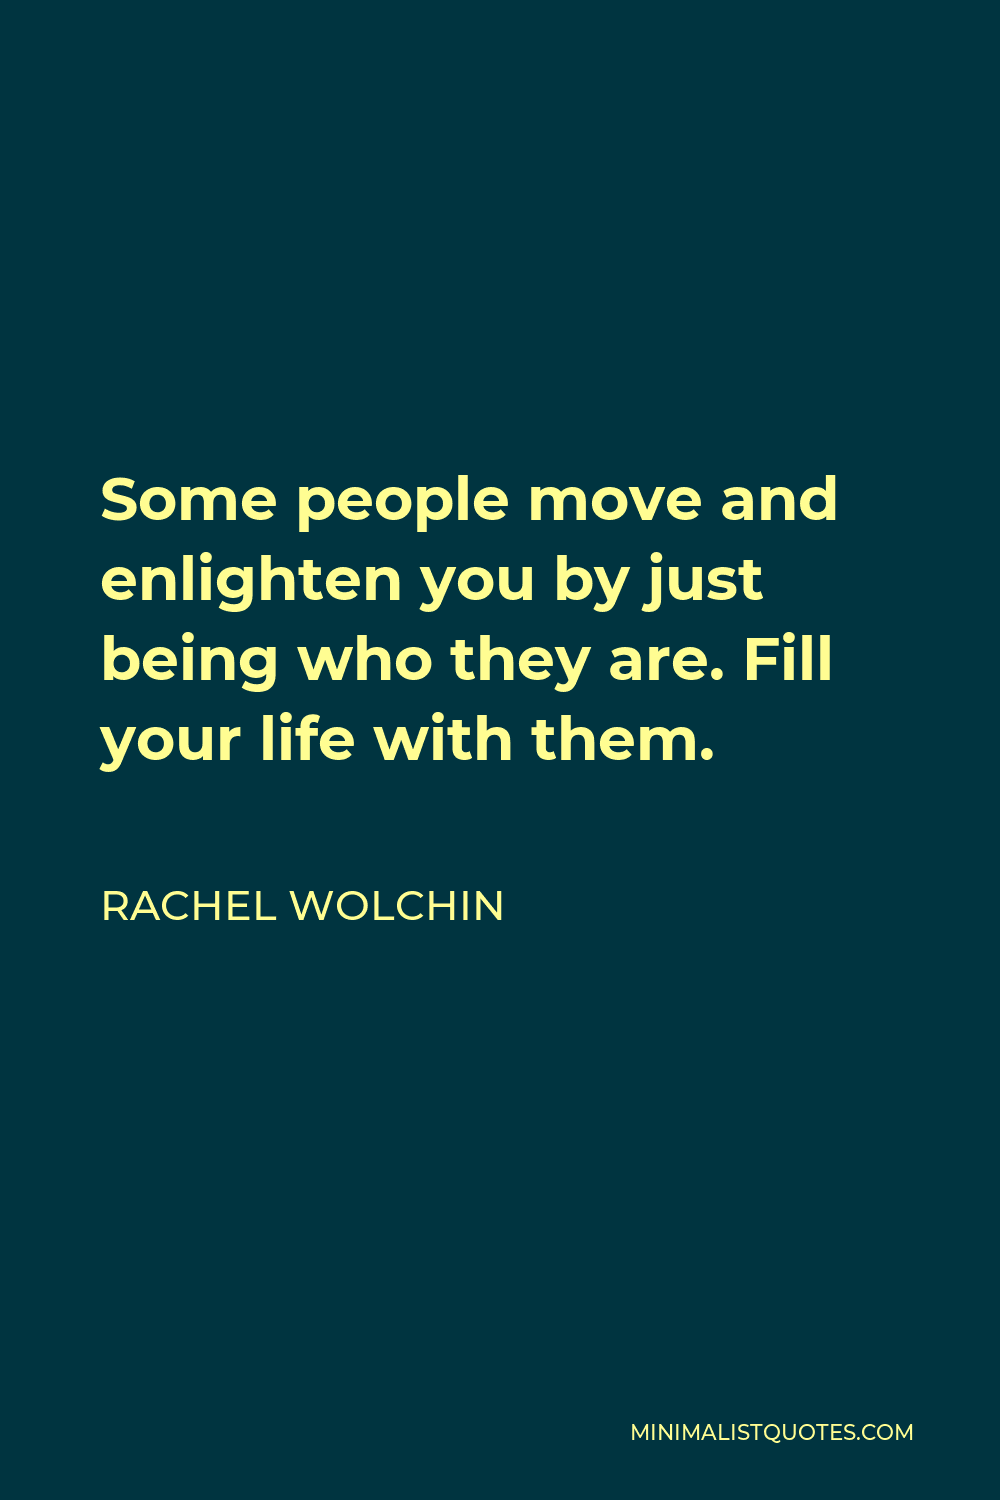 Rachel Wolchin Quote - Some people move and enlighten you by just being who they are. Fill your life with them.